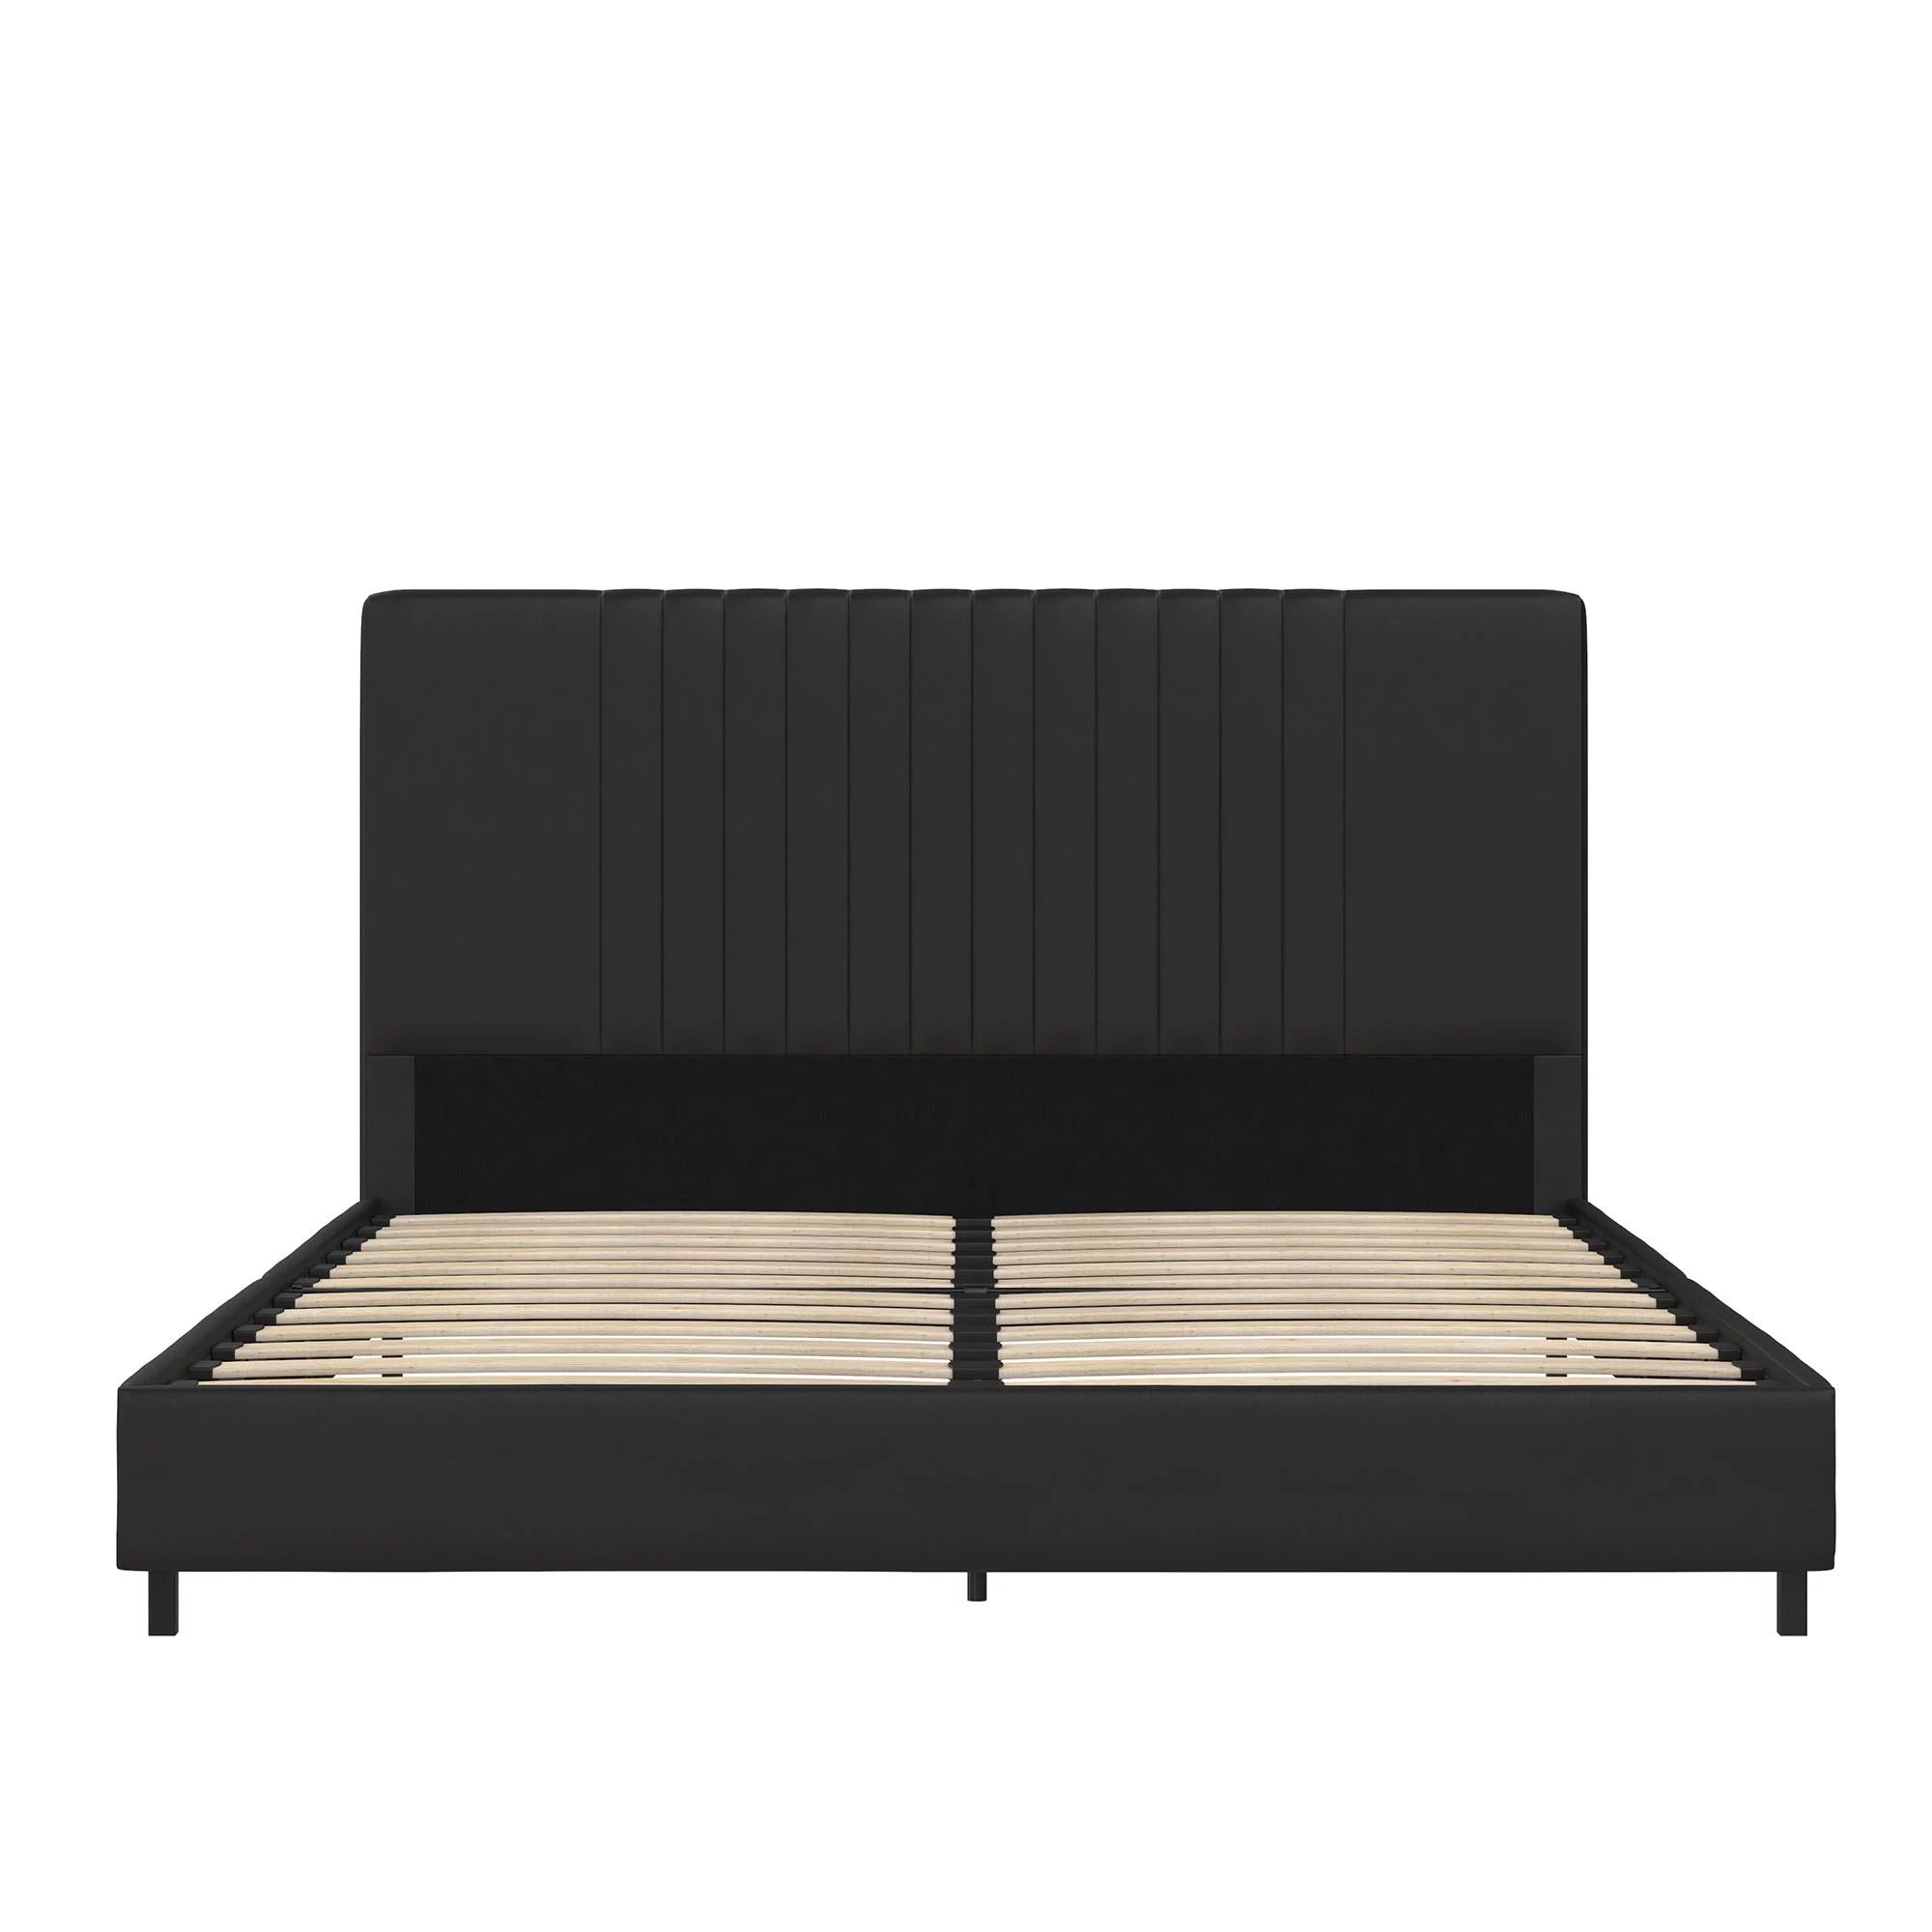 RealRooms Rio Upholstered Bed, Full, Black Faux Leather | Walmart (US)